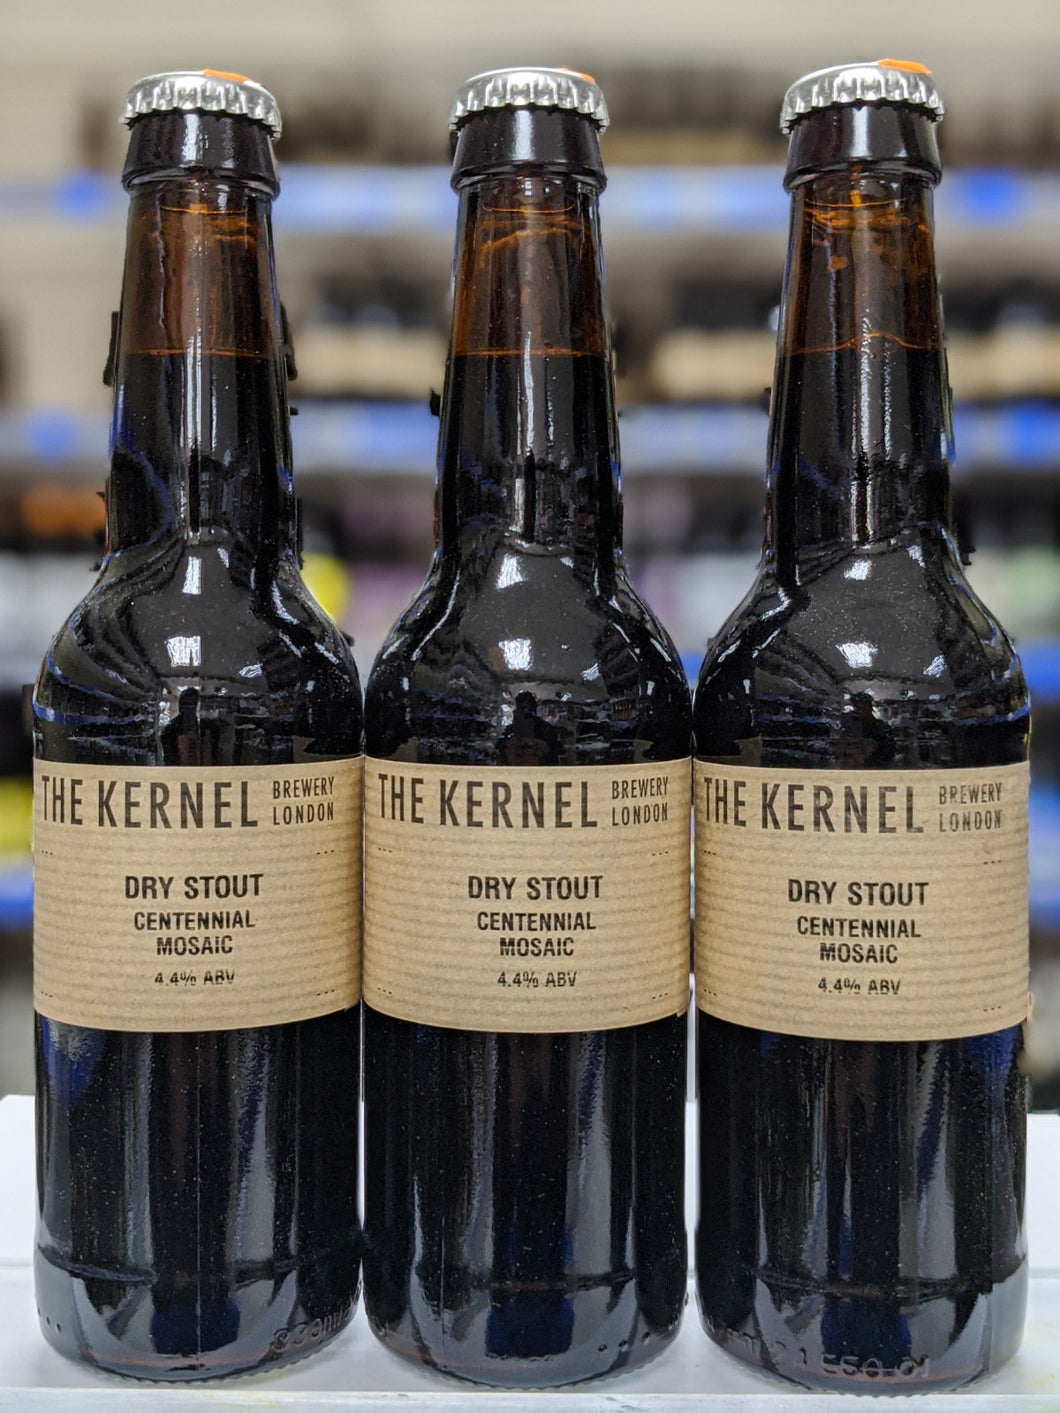 Dry Stout Centennial Mosaic - The Kernel Brewery - Dry Stout, 4.4%, 330ml Bottle